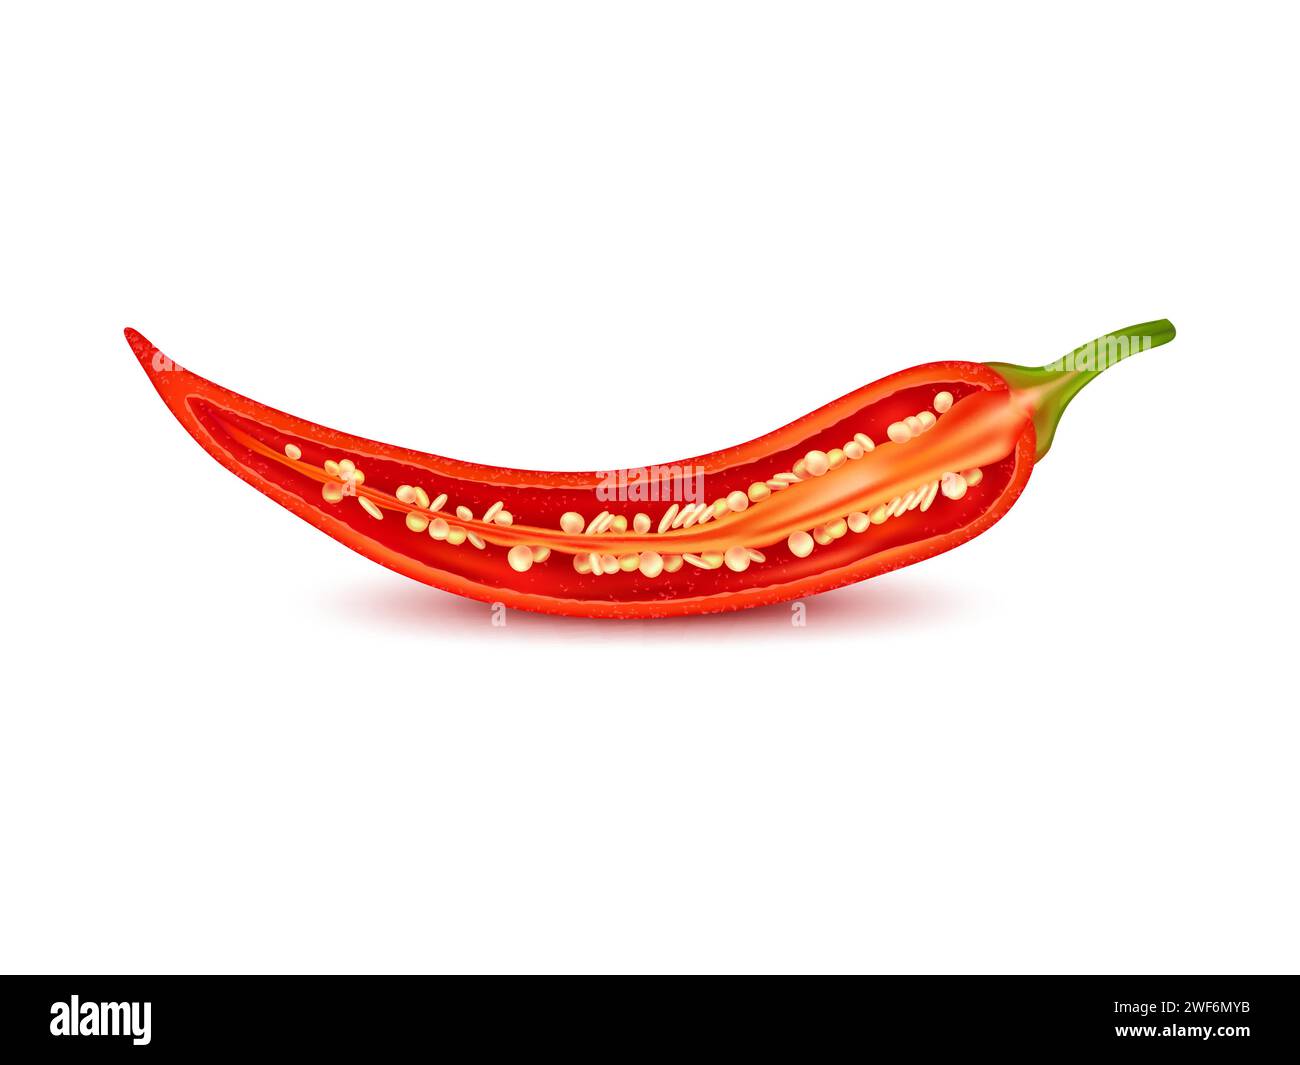 Realistic raw isolated half chili pepper. Isolated 3d vector longitudinal section of chilly or jalapeno pod with fiery seeds cluster amidst placental tissue delivering intense heat and spice to dishes Stock Vector